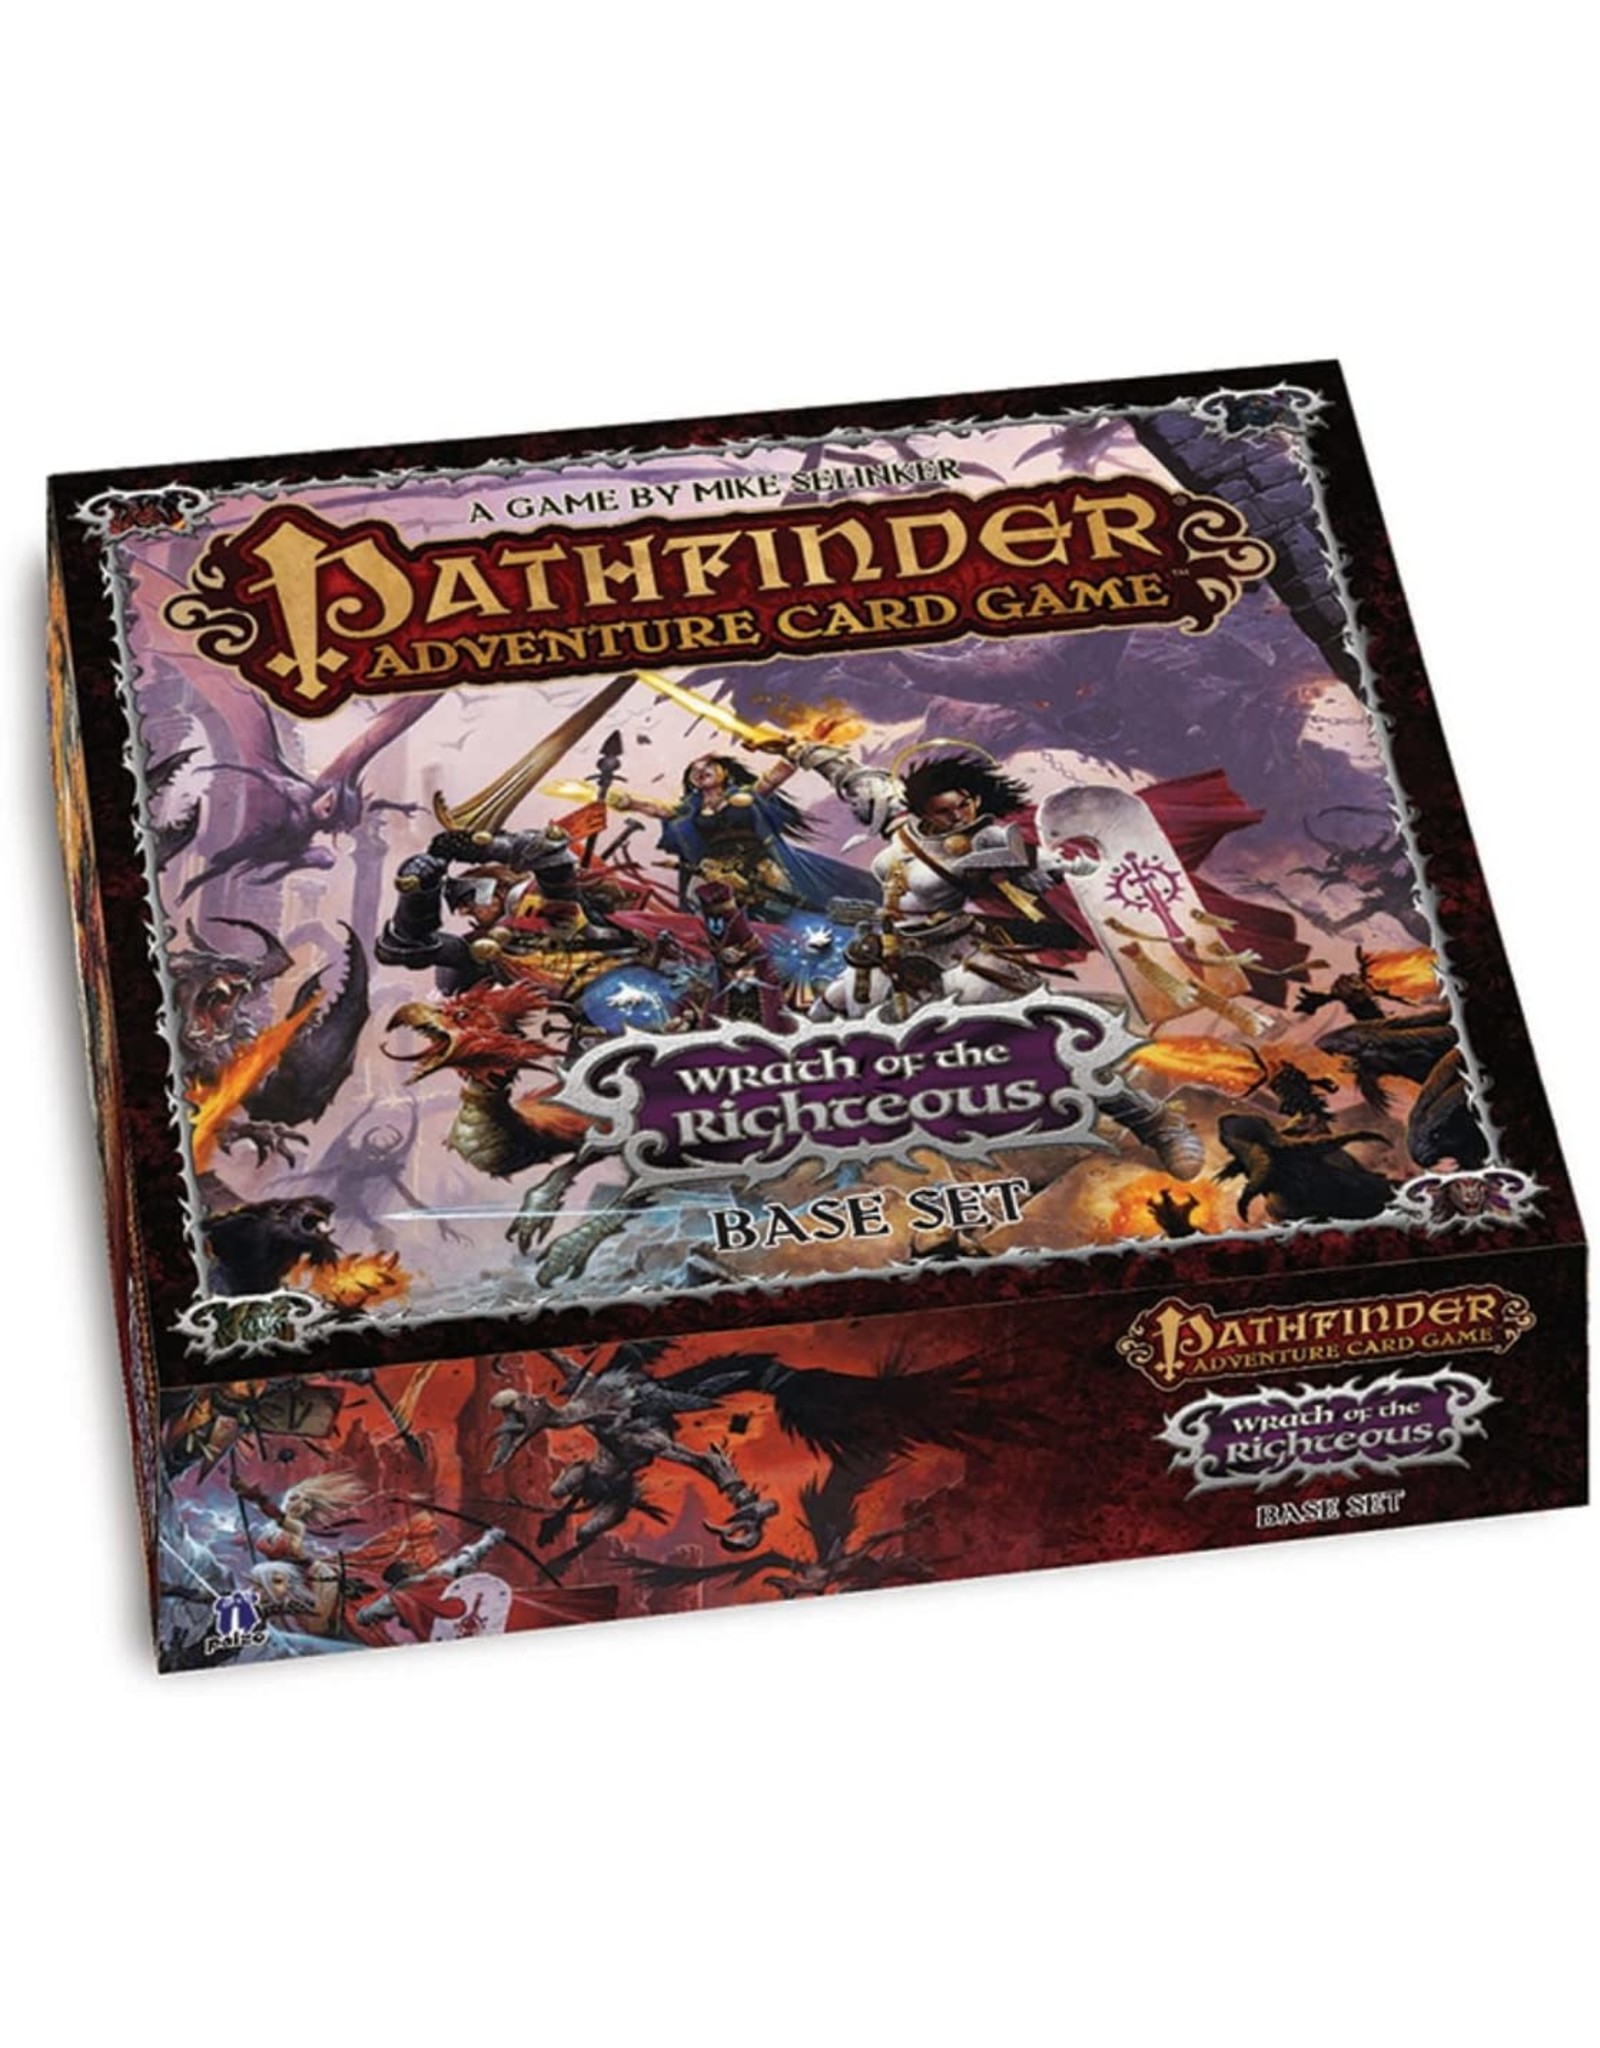 Pathfinder Adventure Card Game Wrath of the Righteous